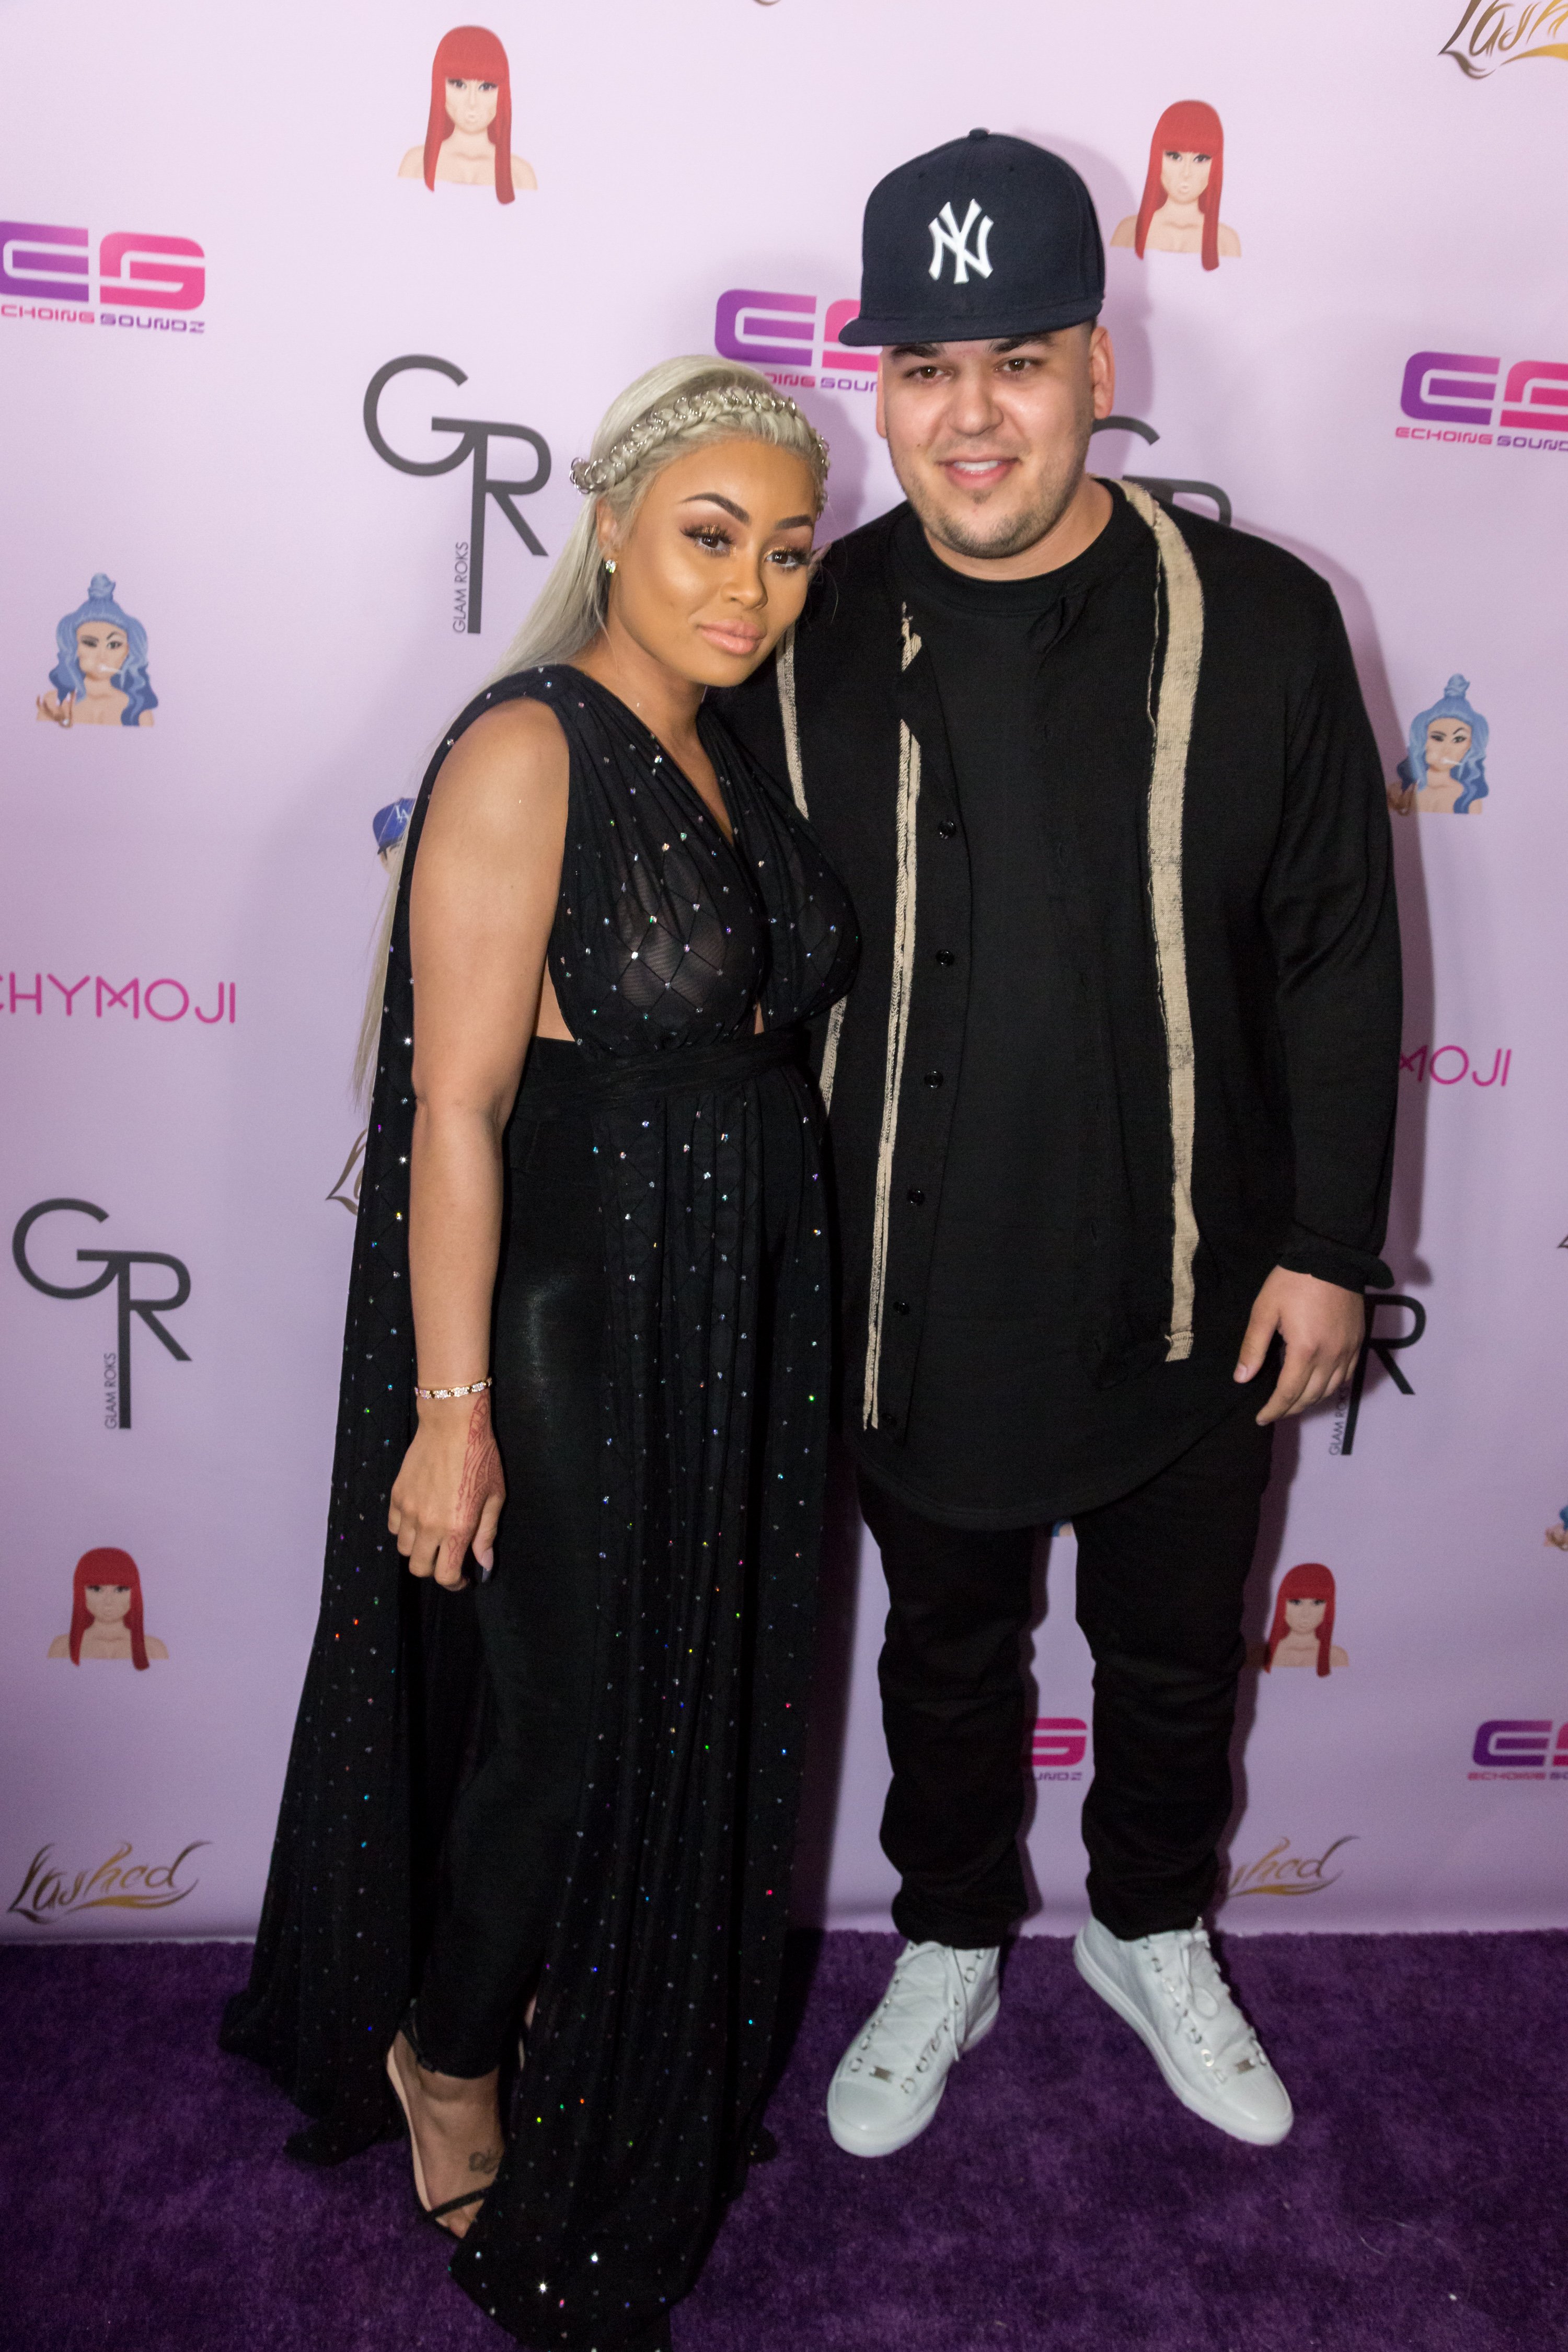 Rob Kardashian and Blac Chyna at the latter's birthday celebration at the Hard Rock Cafe in May 2016. | Photo: Getty Images